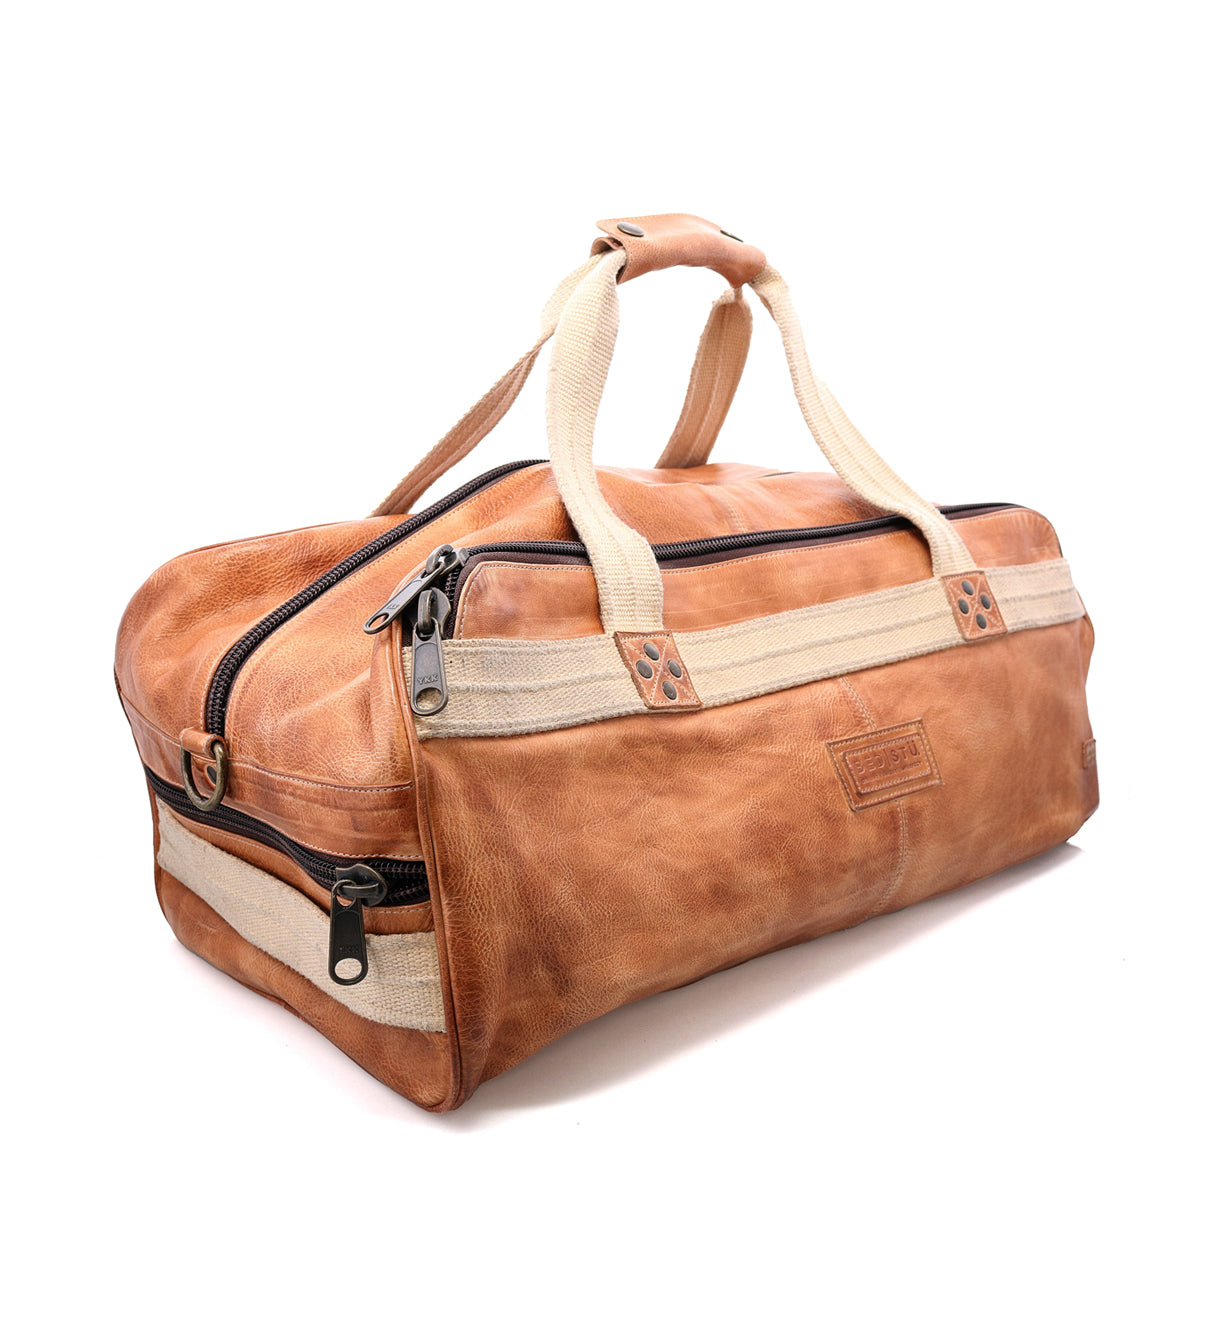 A Ruslan leather duffel bag by Bed Stu with two handles.